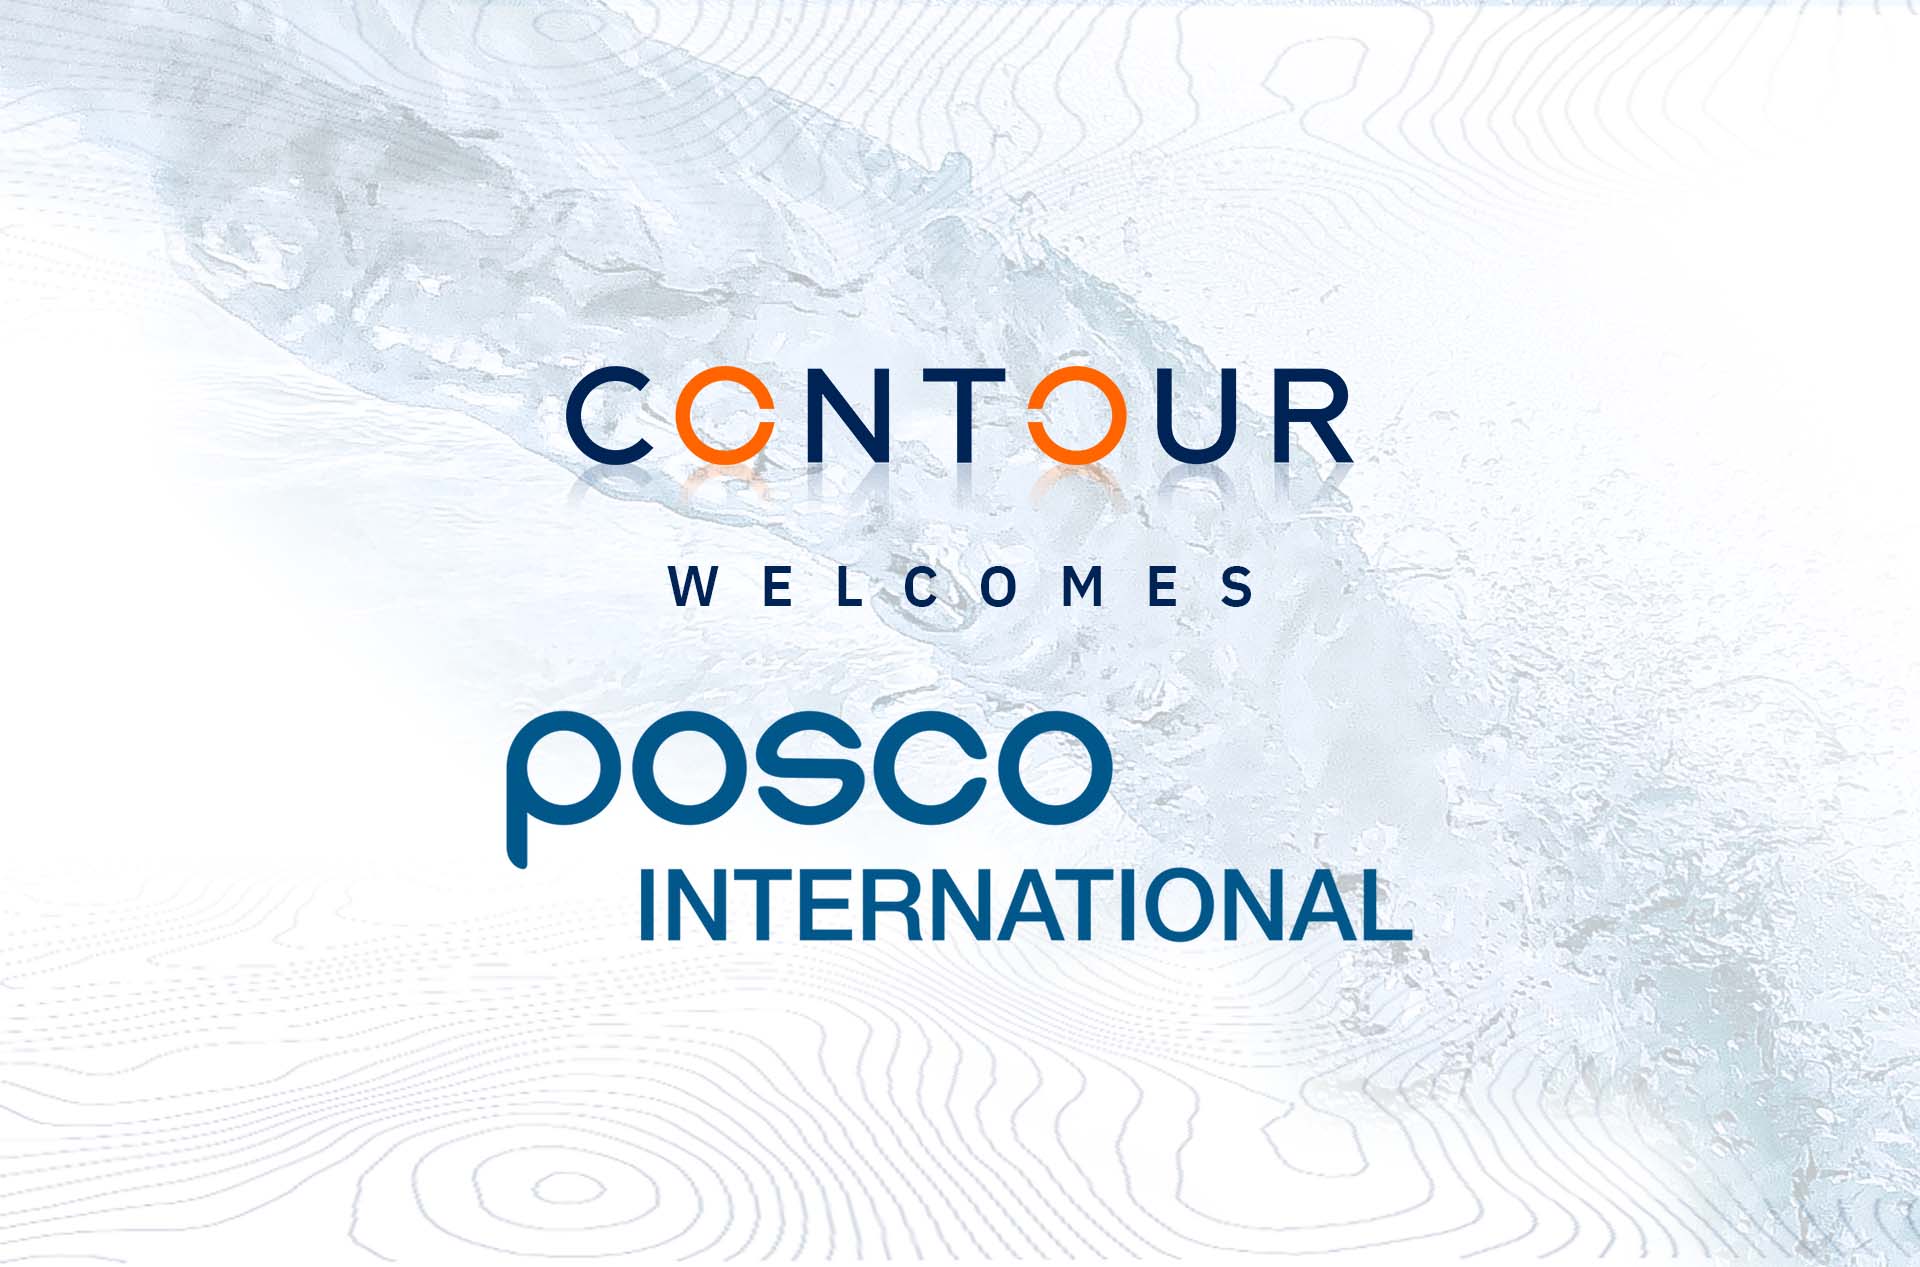 POSCO International prioritises sustainability by partnering with Contour to digitise trade finance